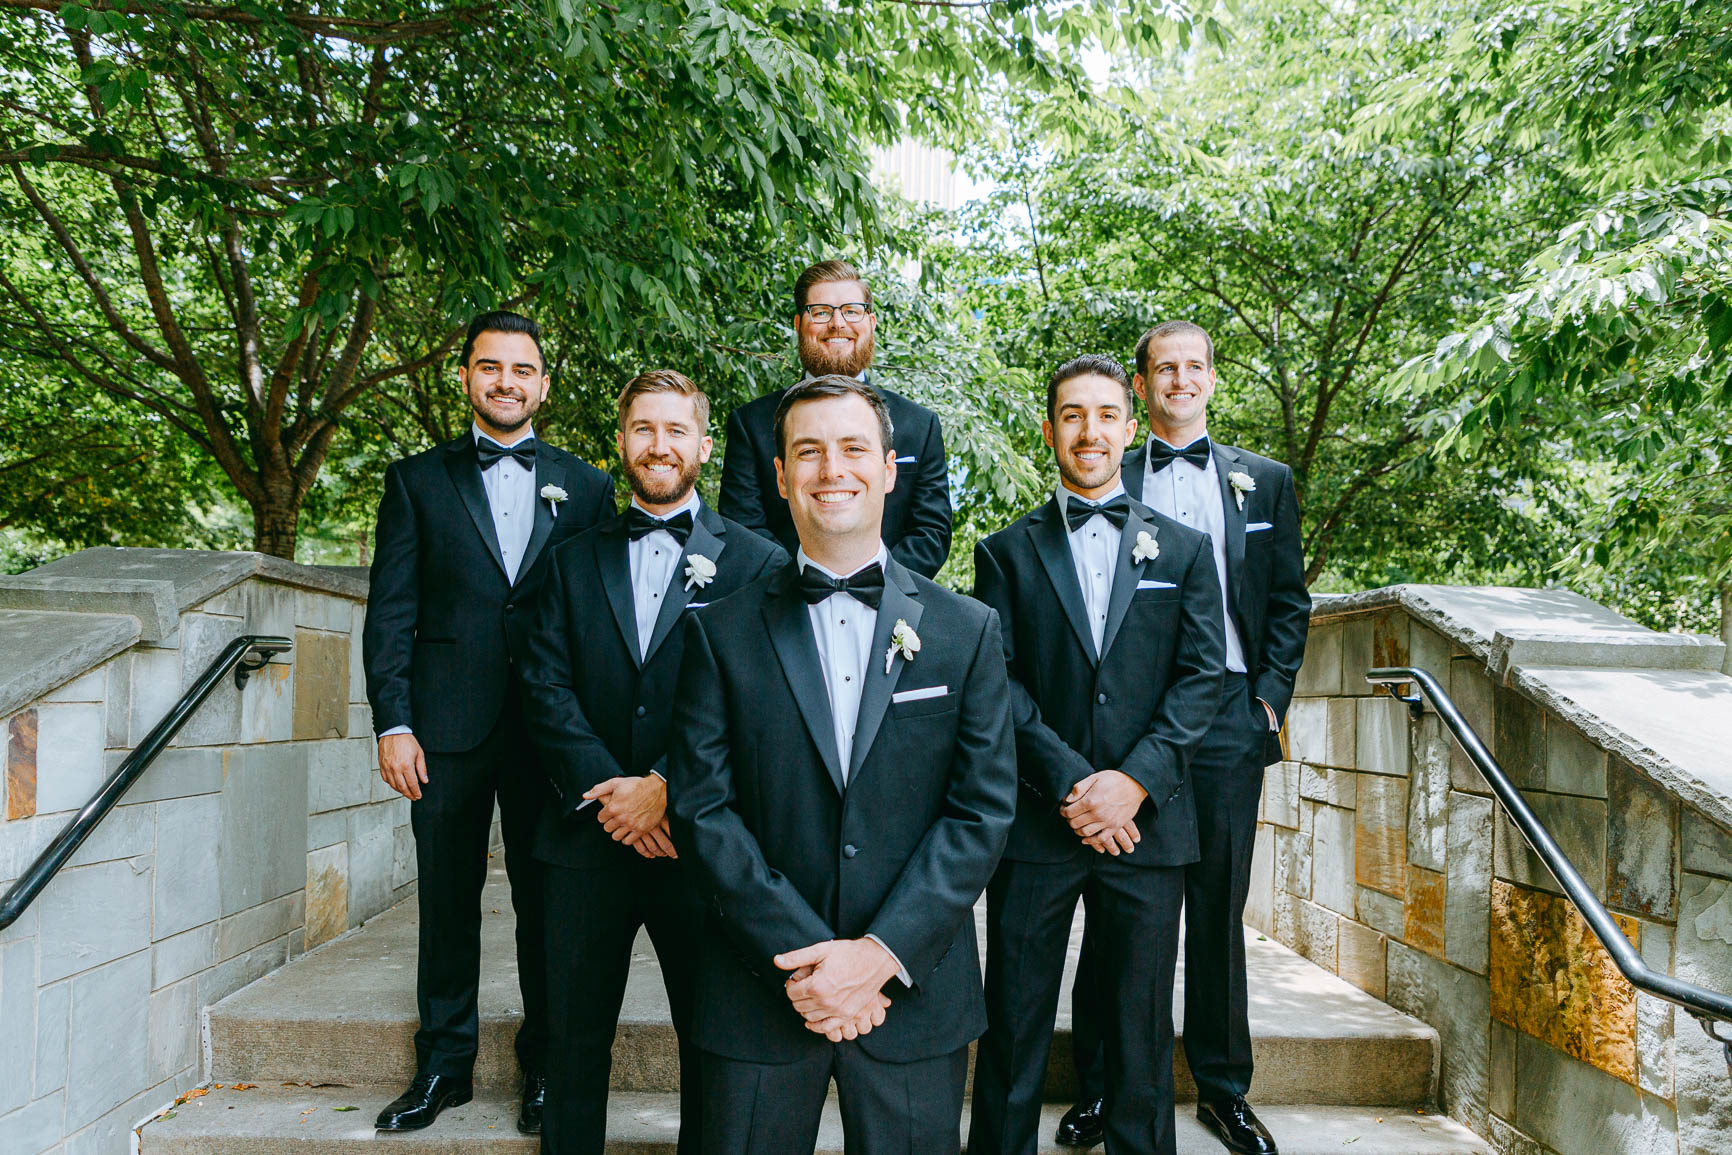 groom and groomsmen photos in uptown Charlotte nc shot by Nhieu Tang Photography | nhieutang.com